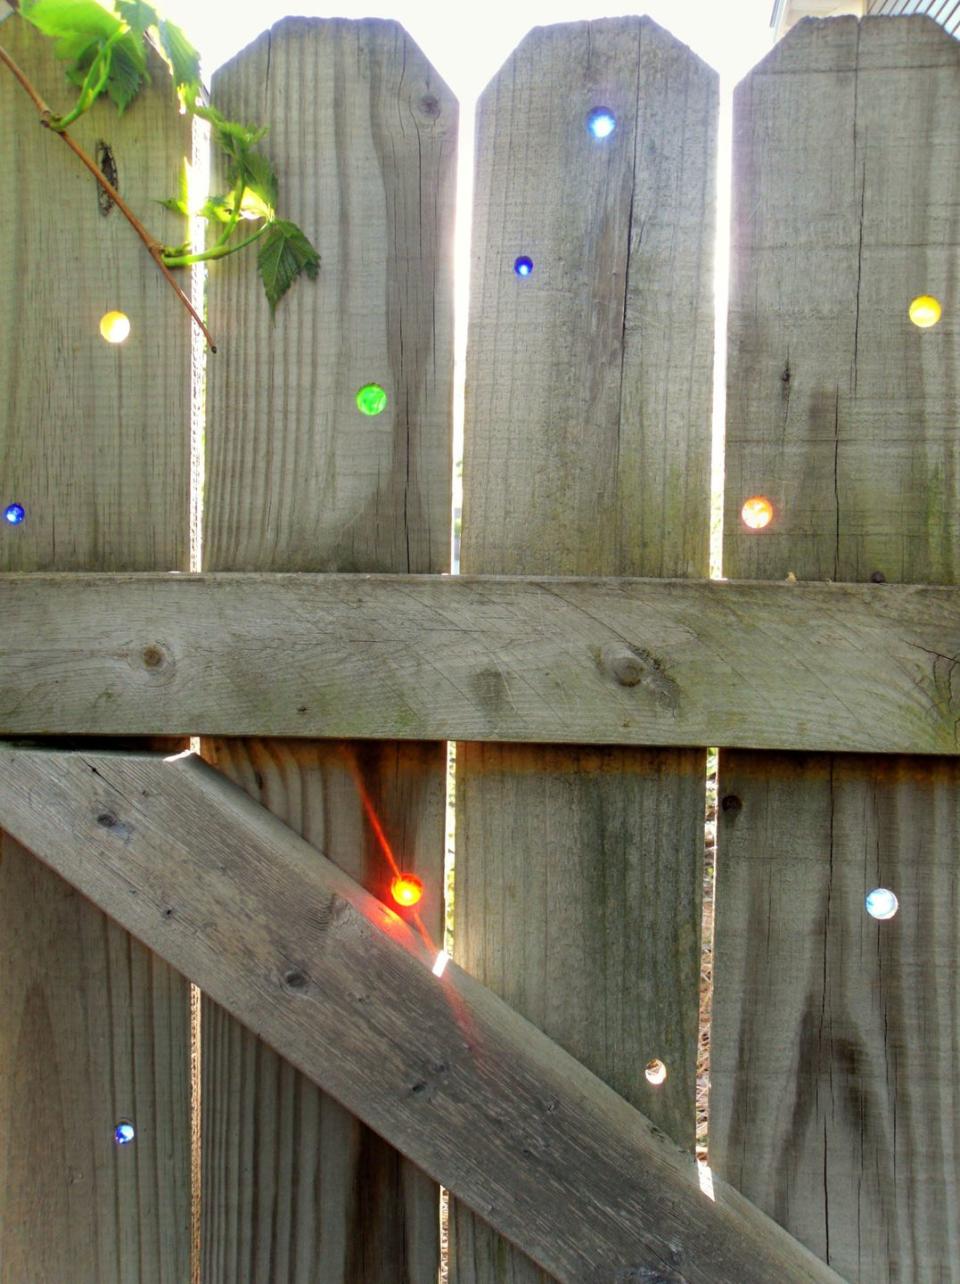 Brighten Up a Basic Fence